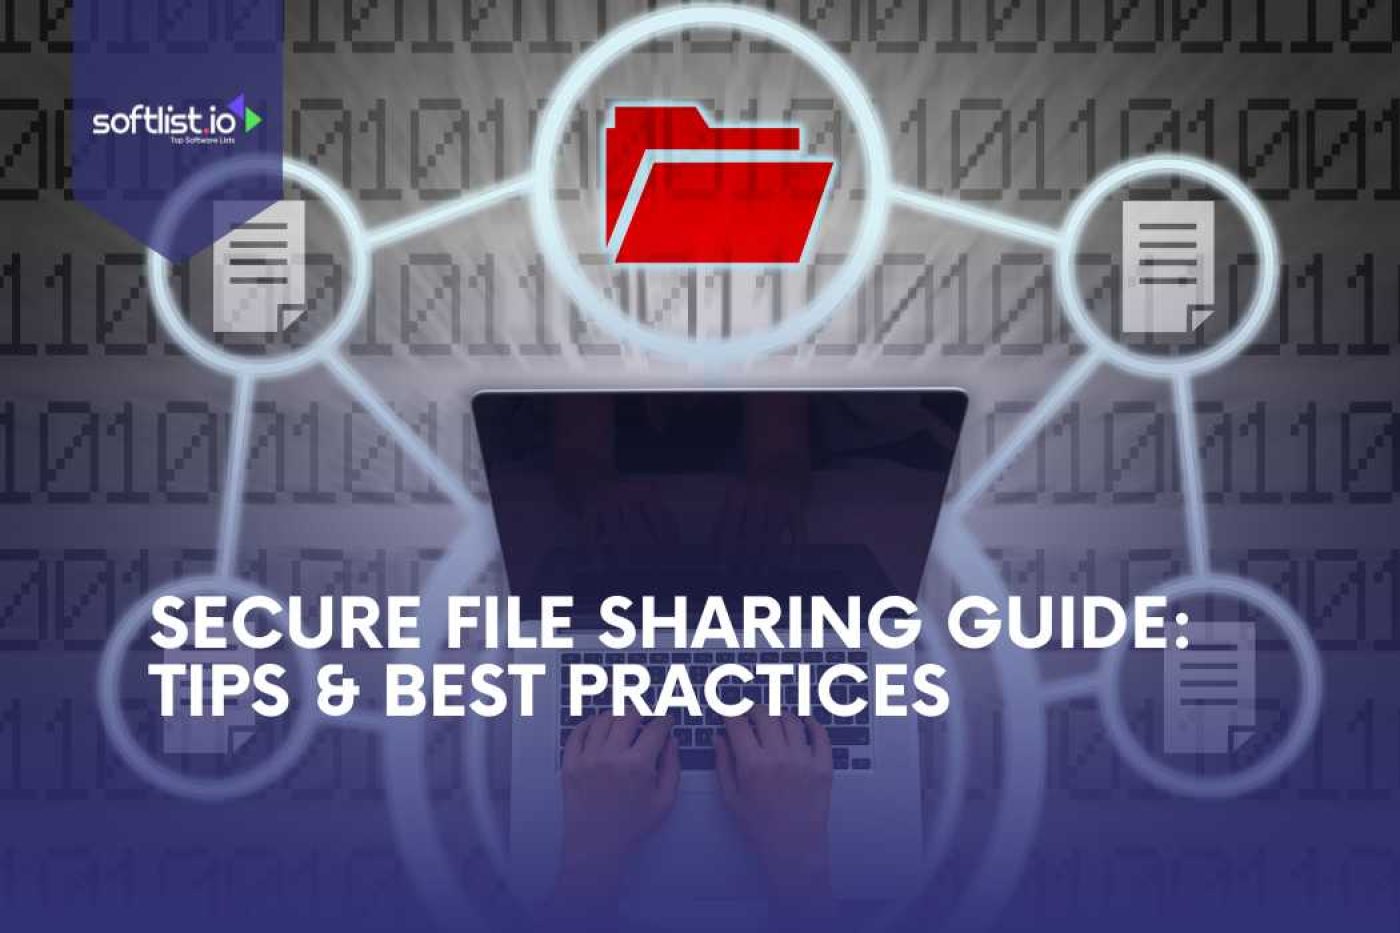 Secure File Sharing Guide Tips & Best Practices